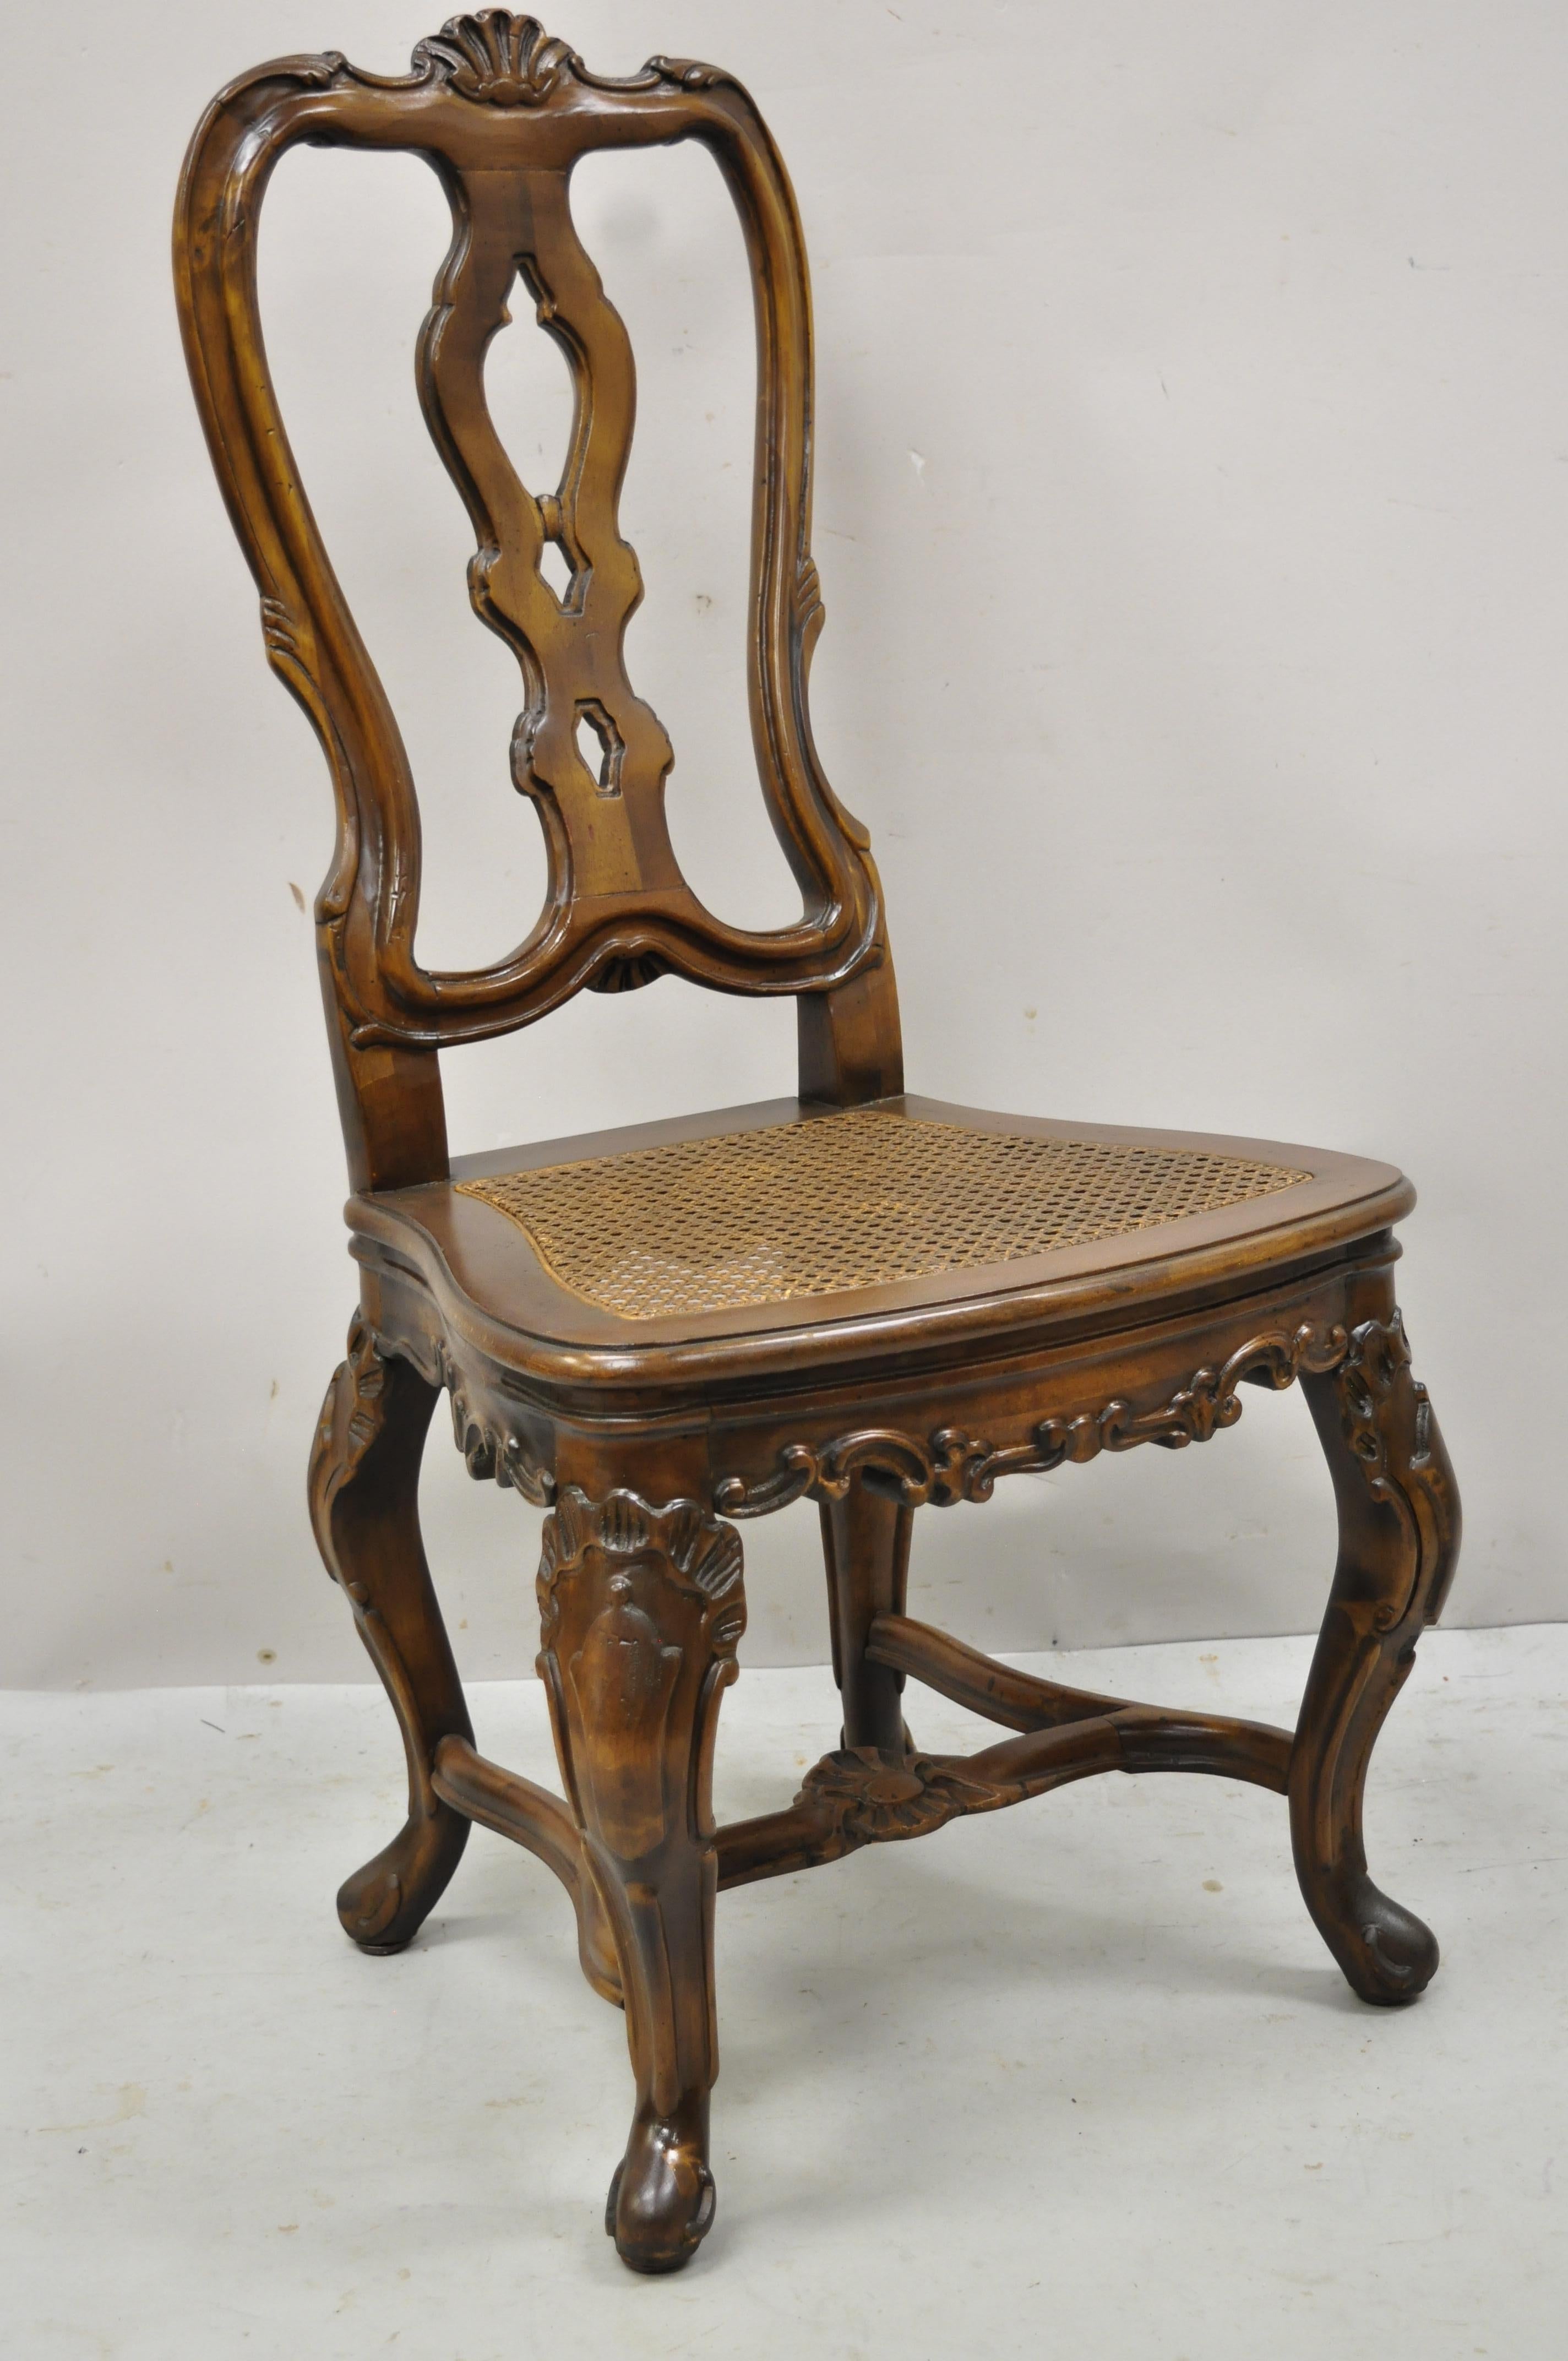 Spanish Rococo Baroque style solid pine wood cane seat dining chairs - Set of 4. Item features (4) side chairs, cane seats, solid wood frame, beautiful wood grain, nicely carved details, cabriole legs, very nice set, quality craftsmanship, great